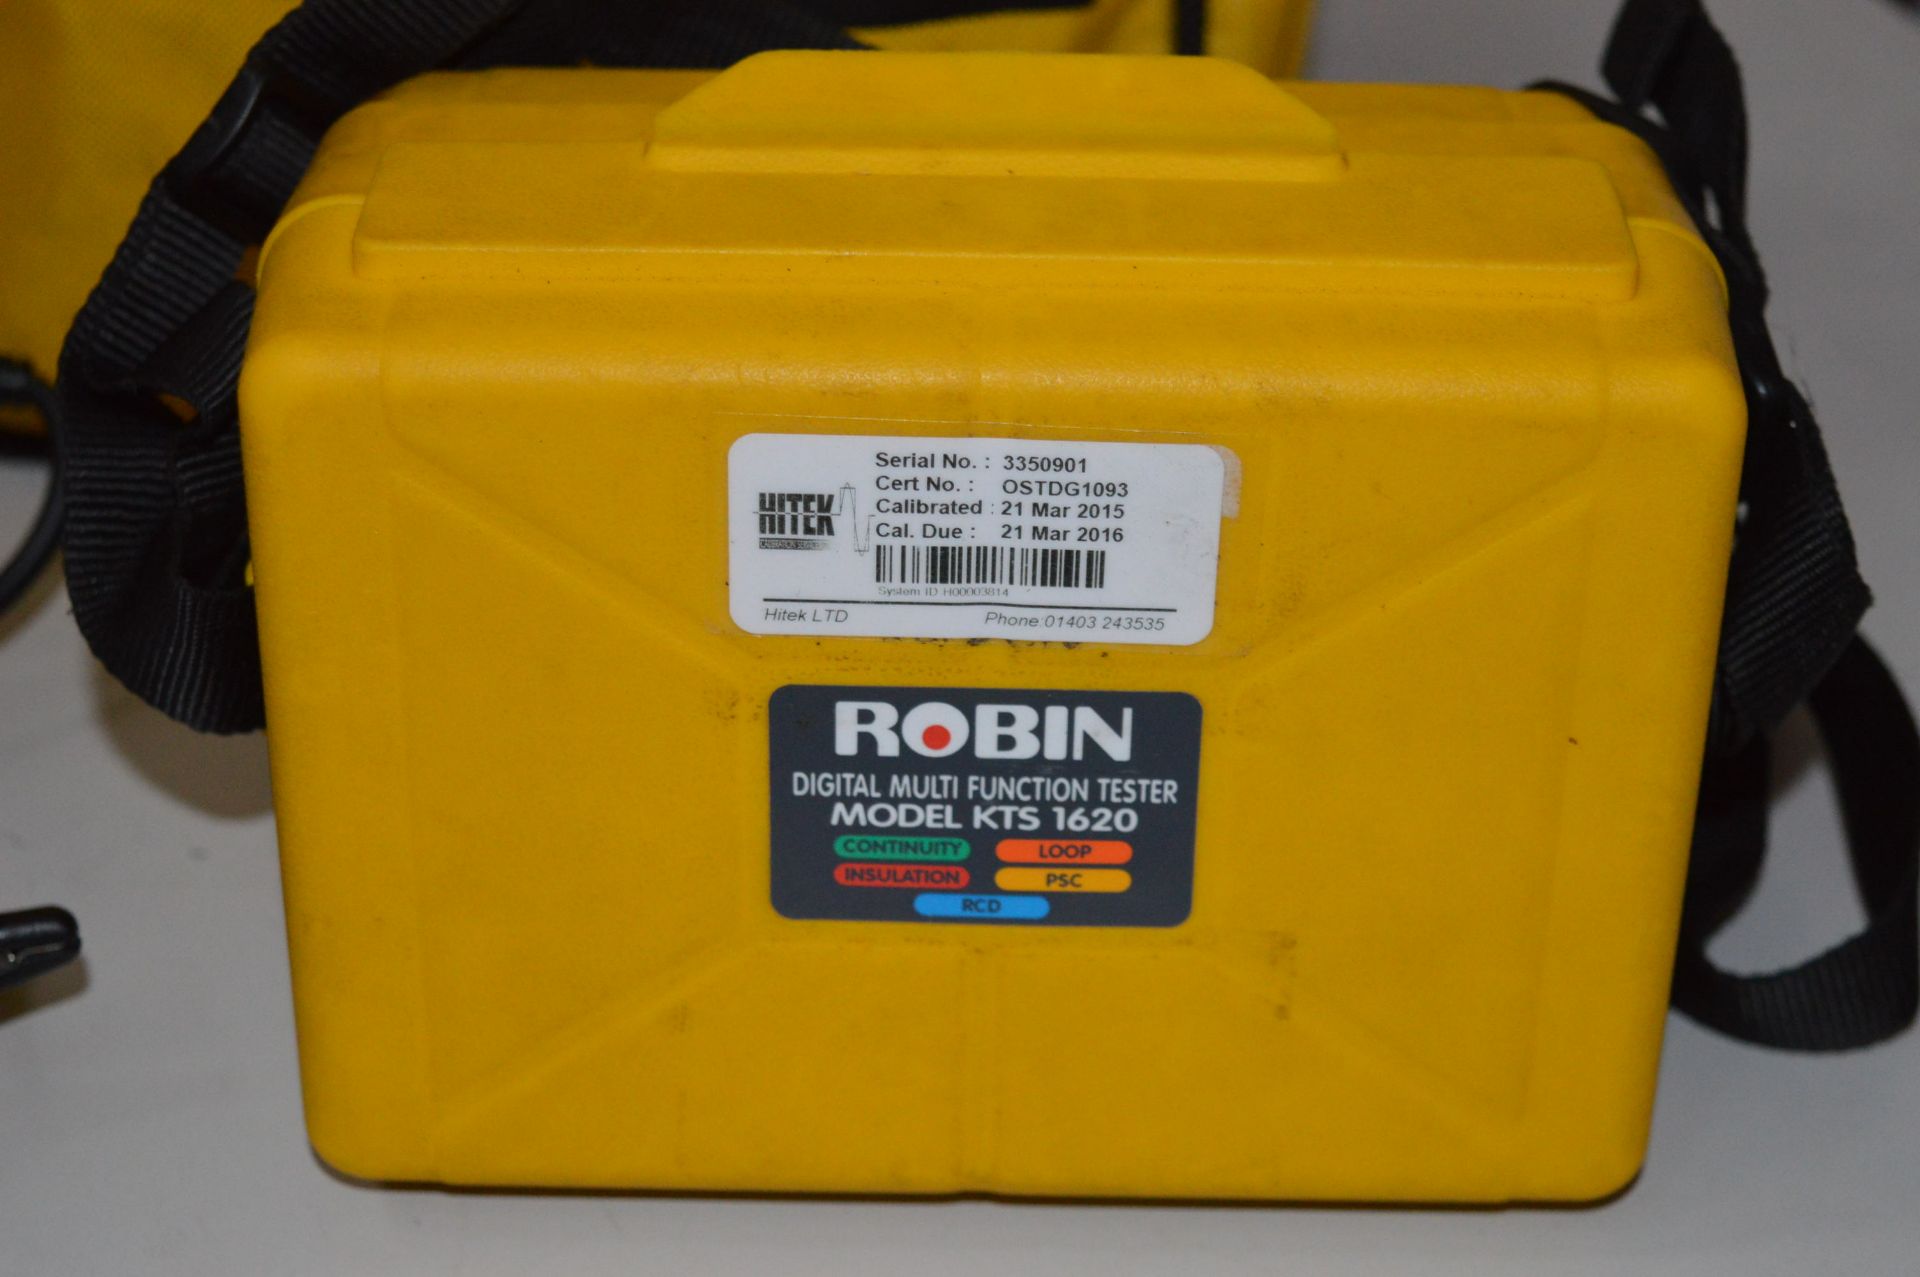 1 x Robin 5 in 1 Multi Function Tester - Model KTS 1620 - Includes Case and Cables - For The Testing - Image 4 of 8